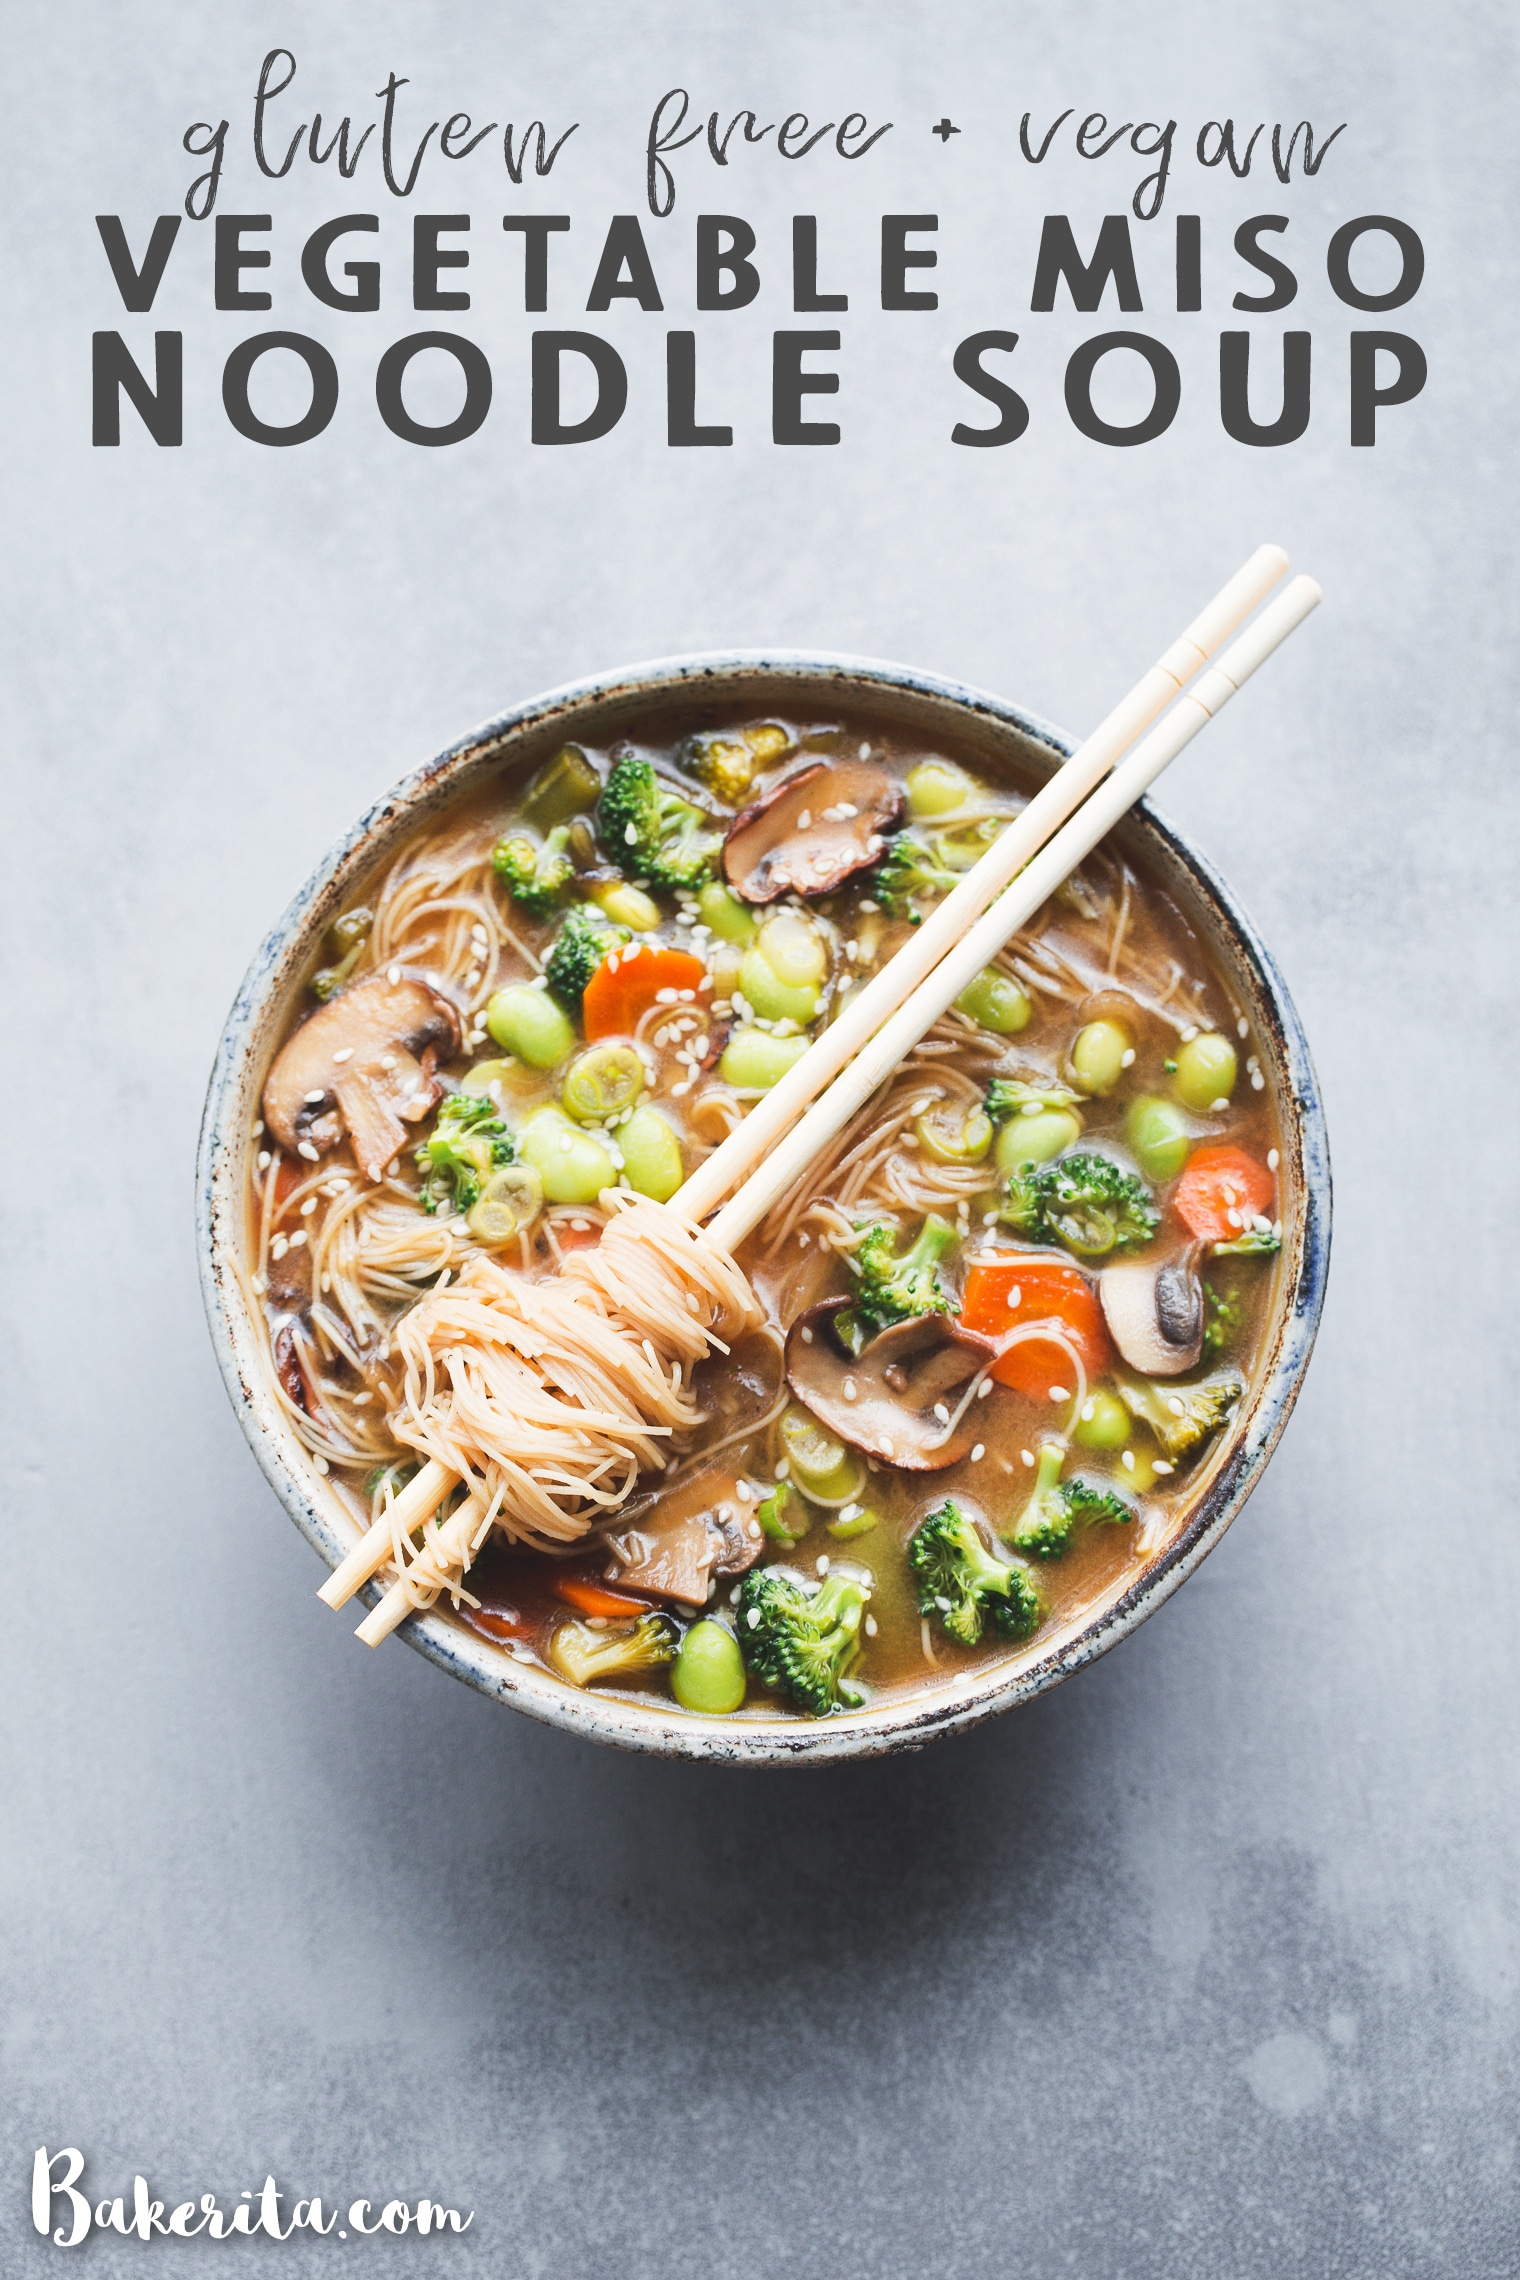 Make this easy Gluten-Free & Vegan Vegetable Noodle Miso Soup for dinner tonight! It's simple to make in under 30 minutes and irresistibly delicious. You can customize the soup with whatever vegetables you have on hand.